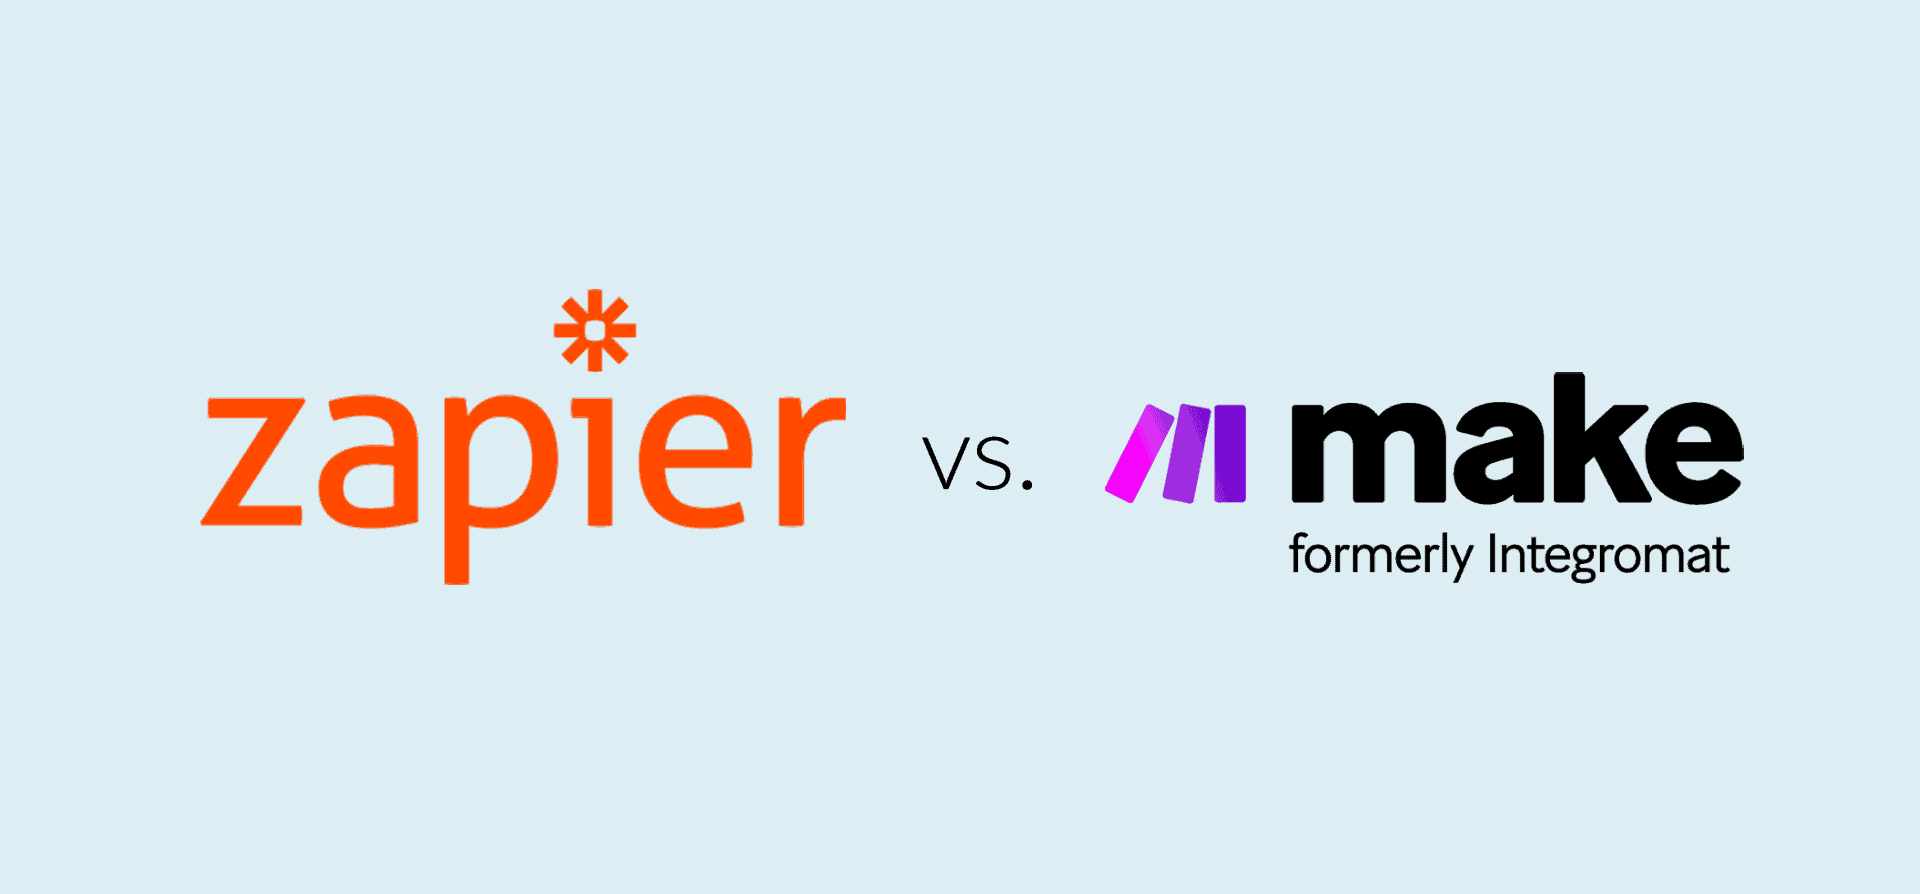 Make vs Zapier: Which One is the Best Automation Platform?